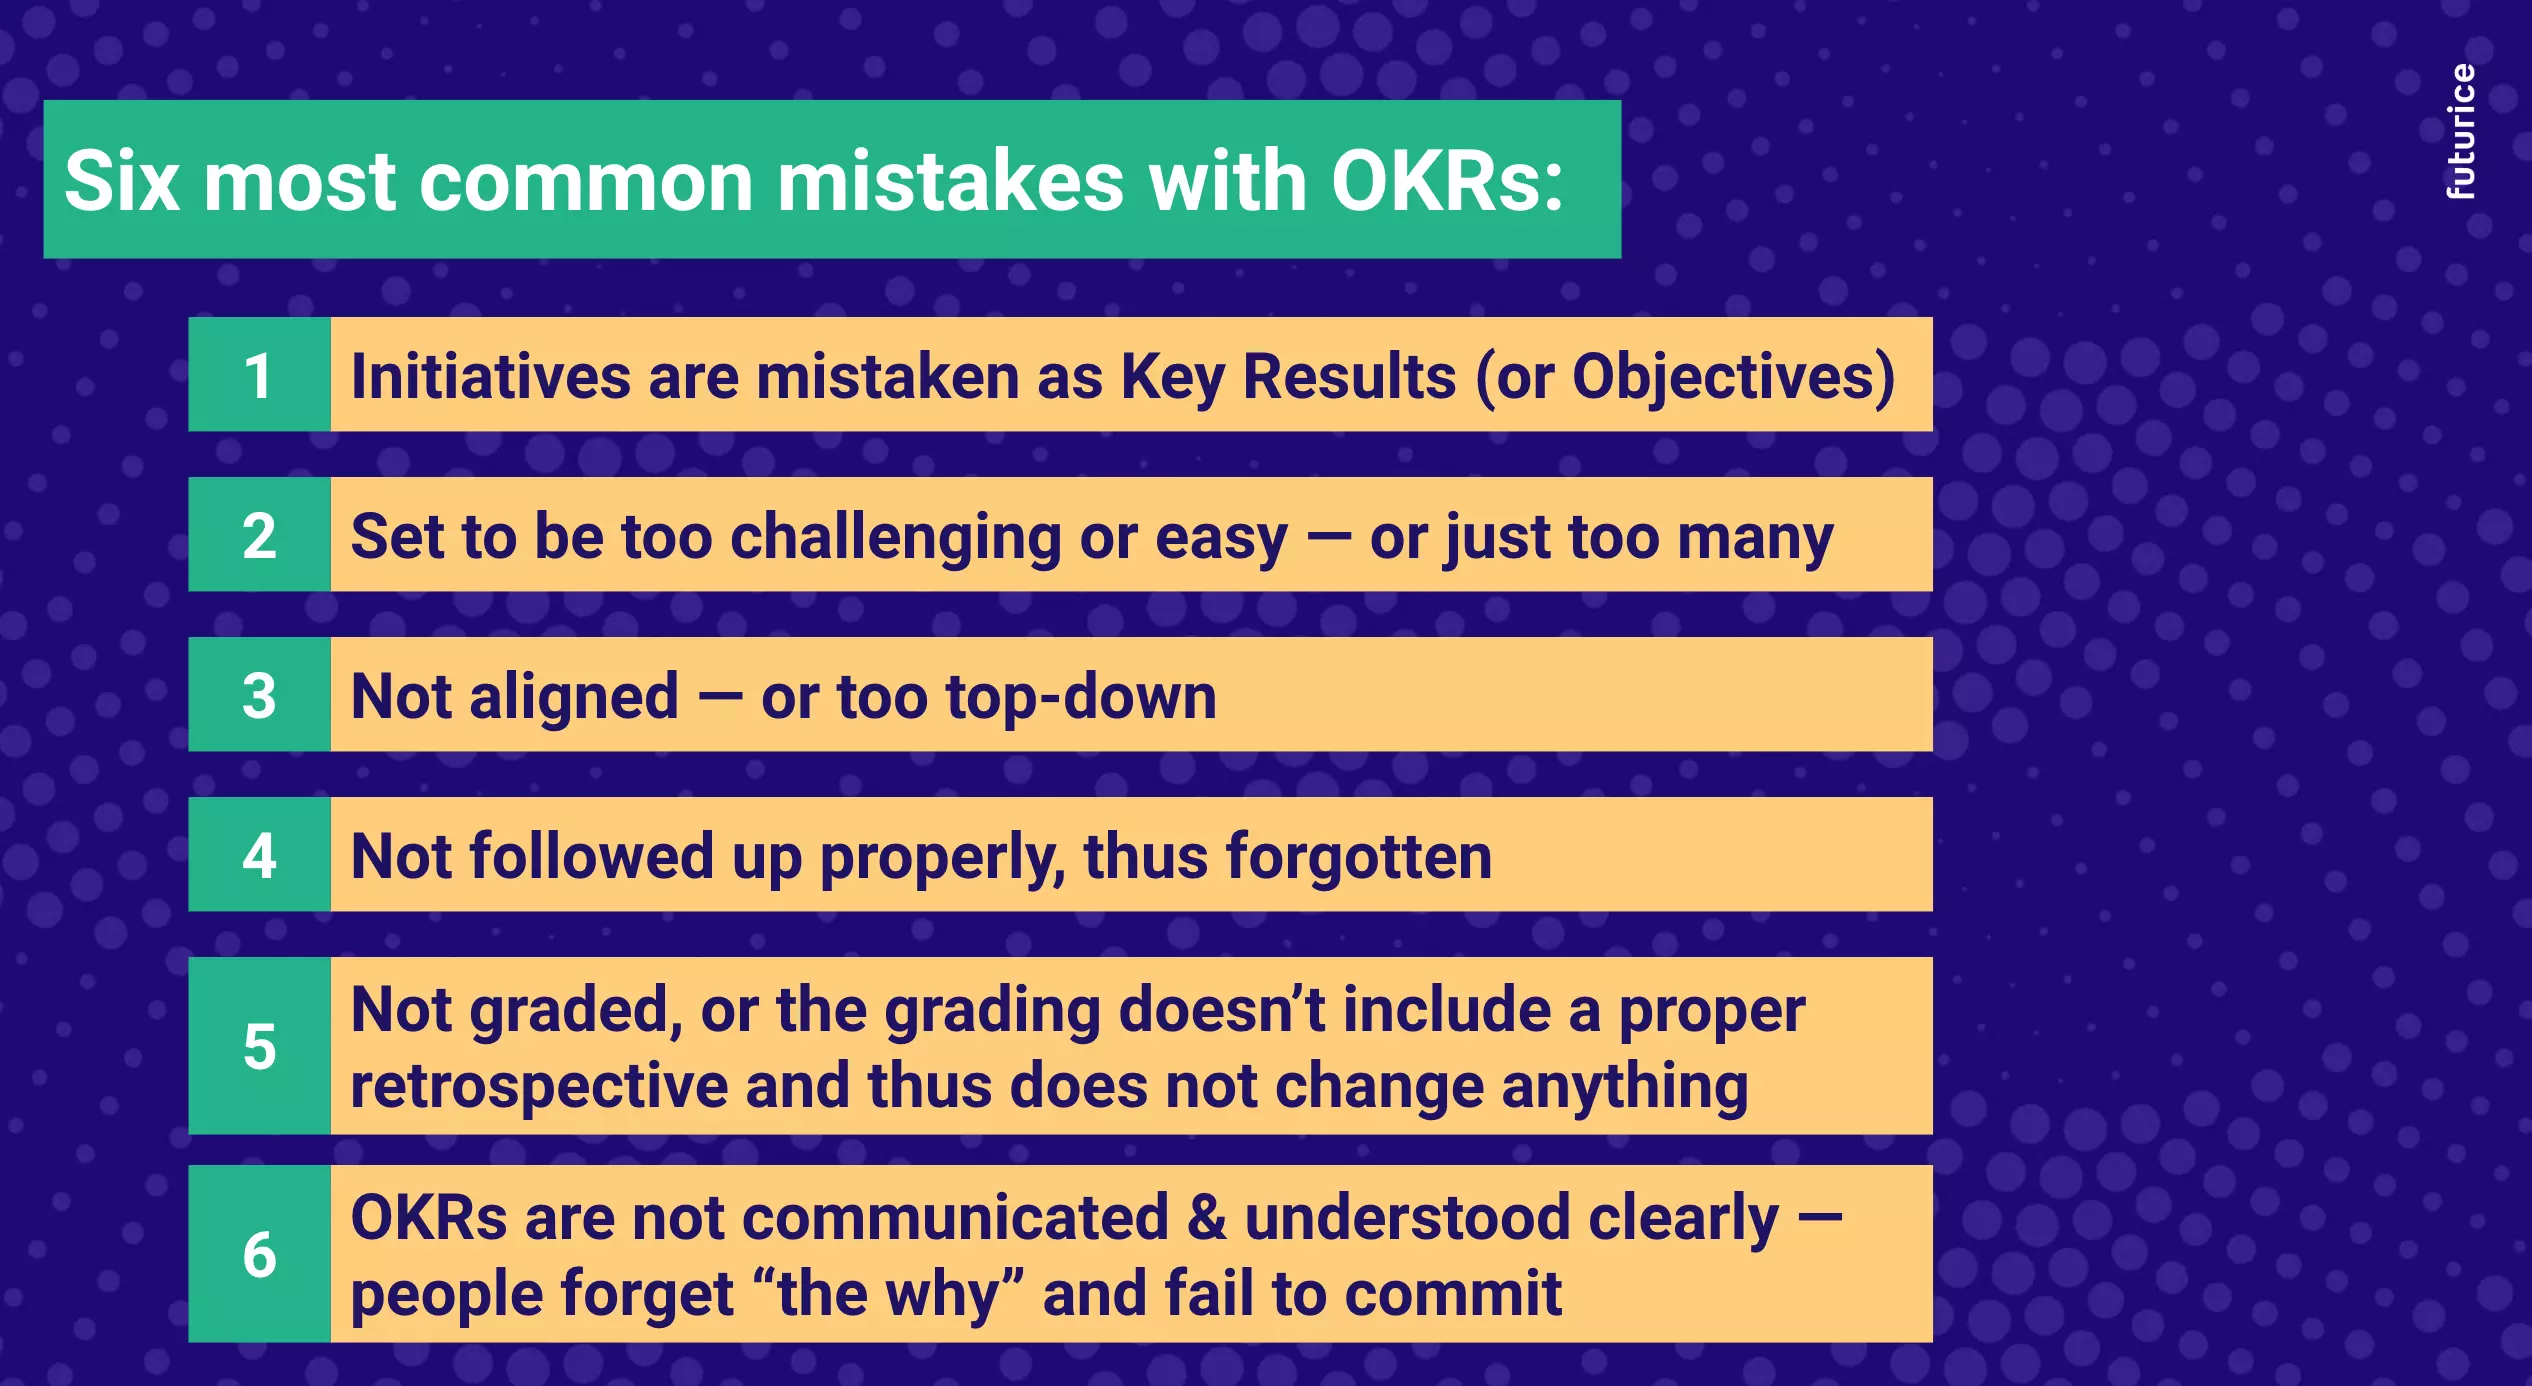 Six common mistakes with OKRs